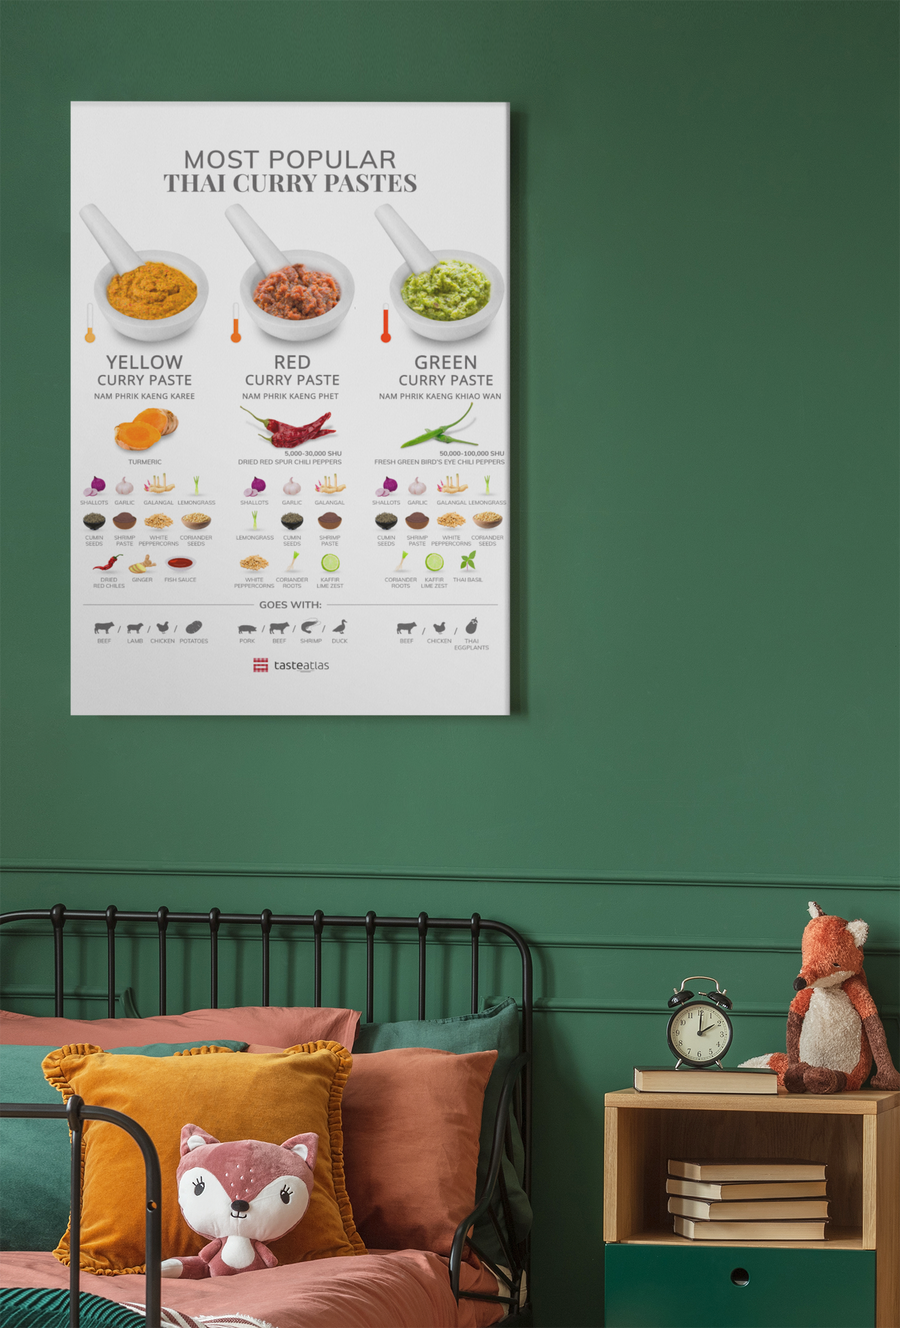 Most Popular Thai Curry Pastes poster on a green wall above the bed